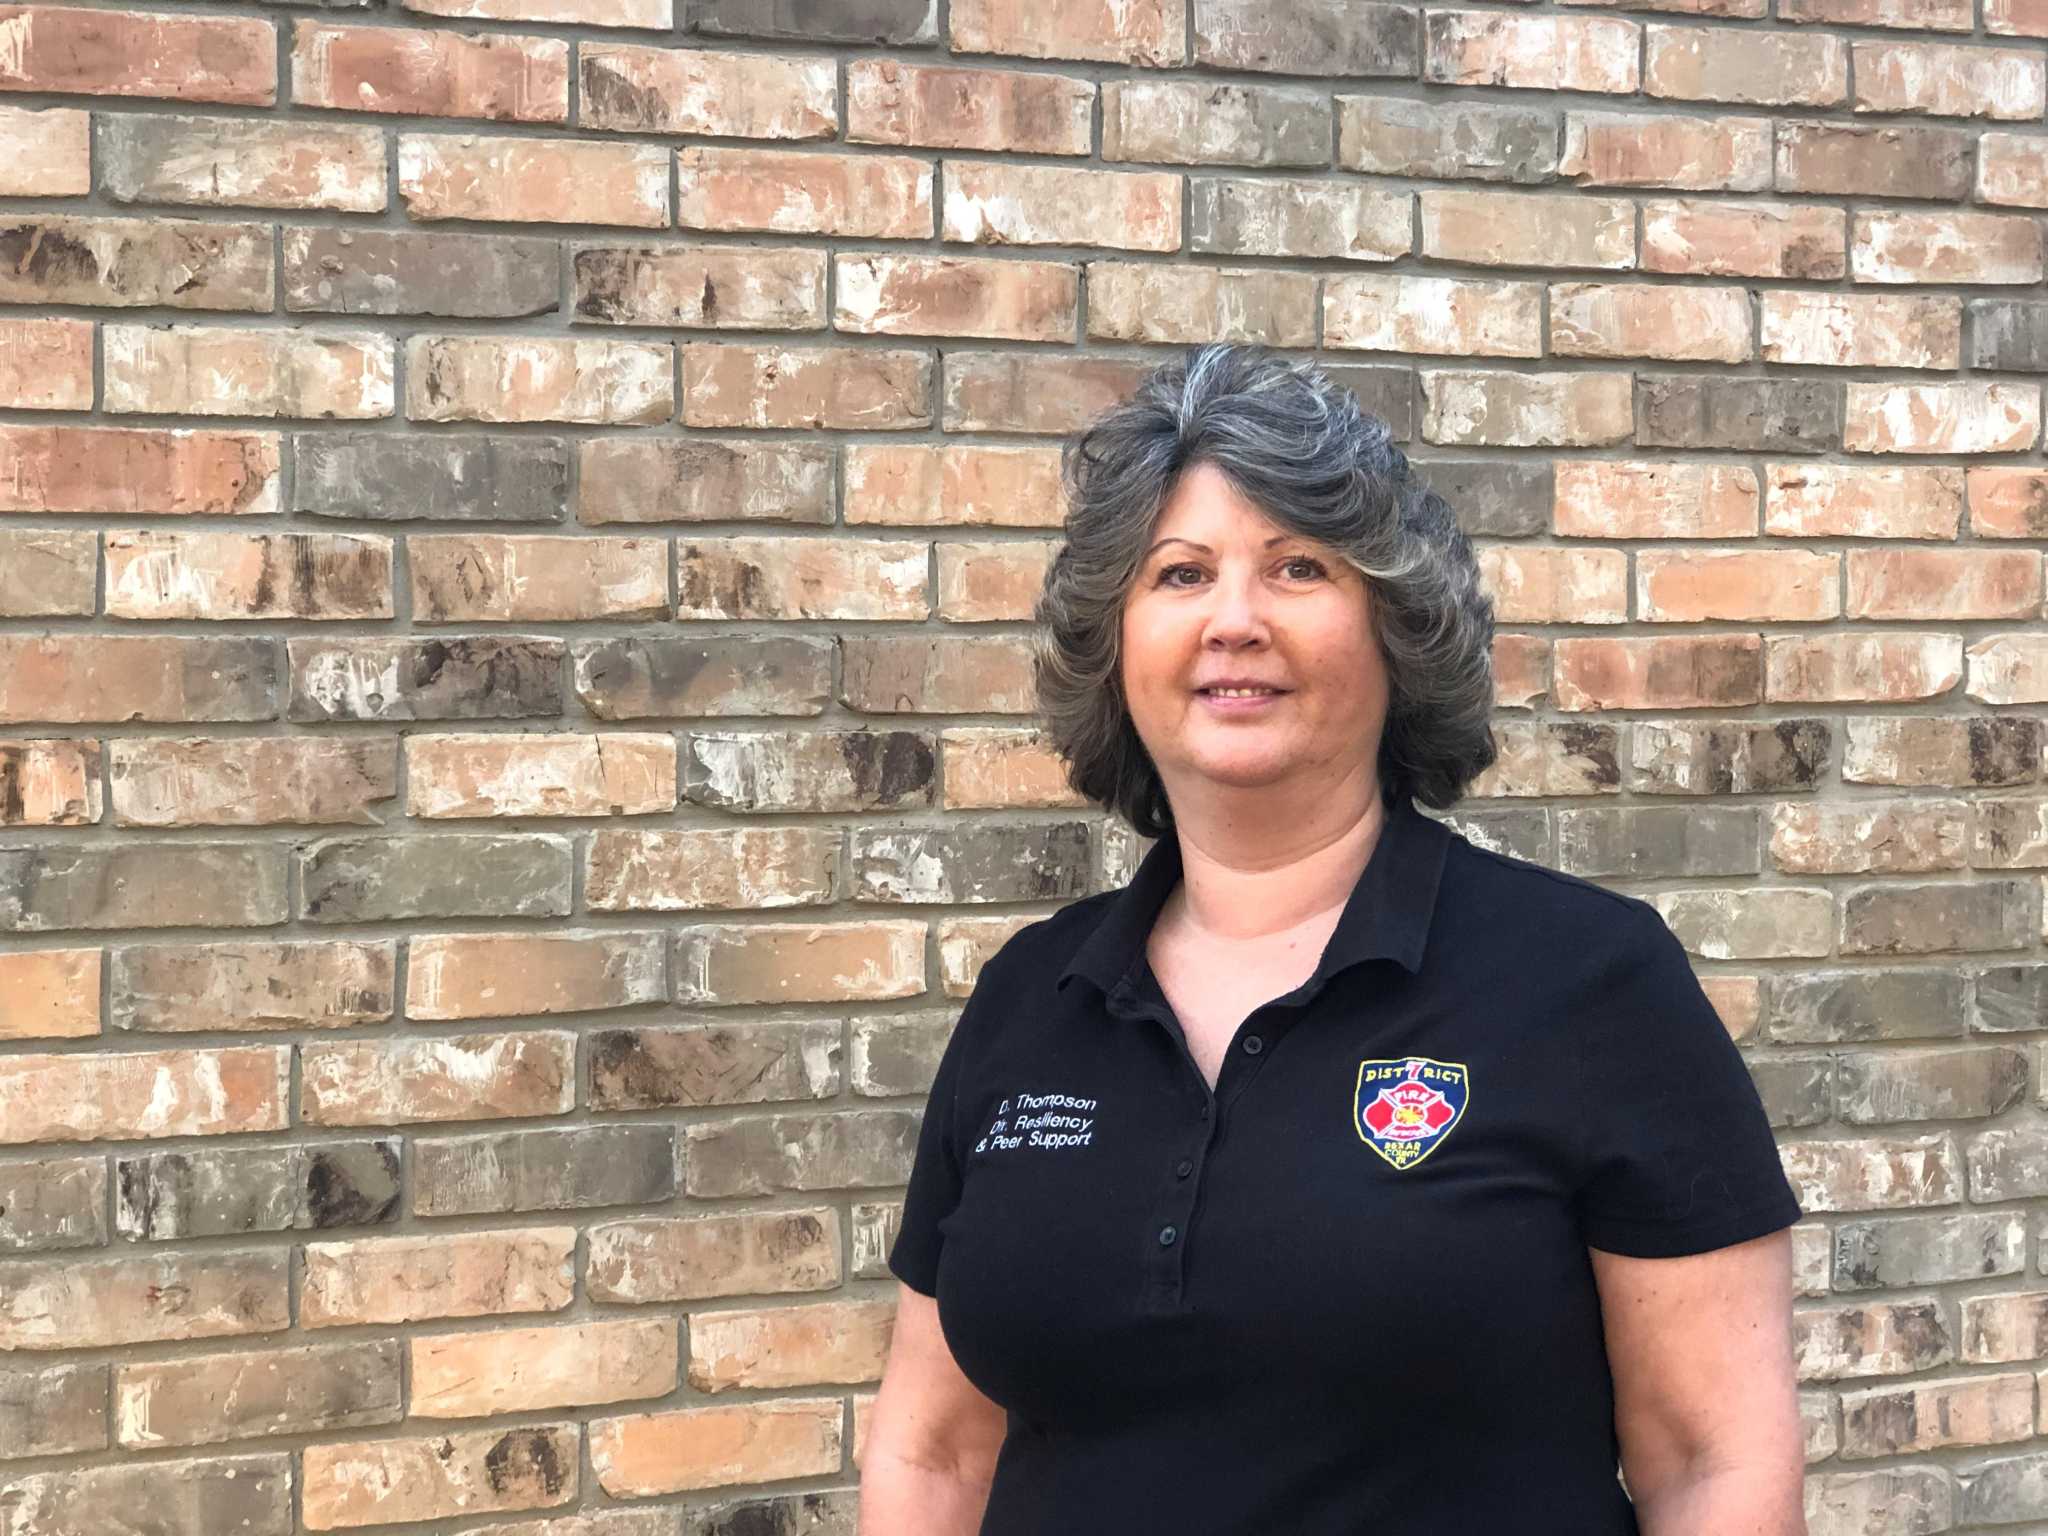 San Antonio peer support counselor offers first responders help via